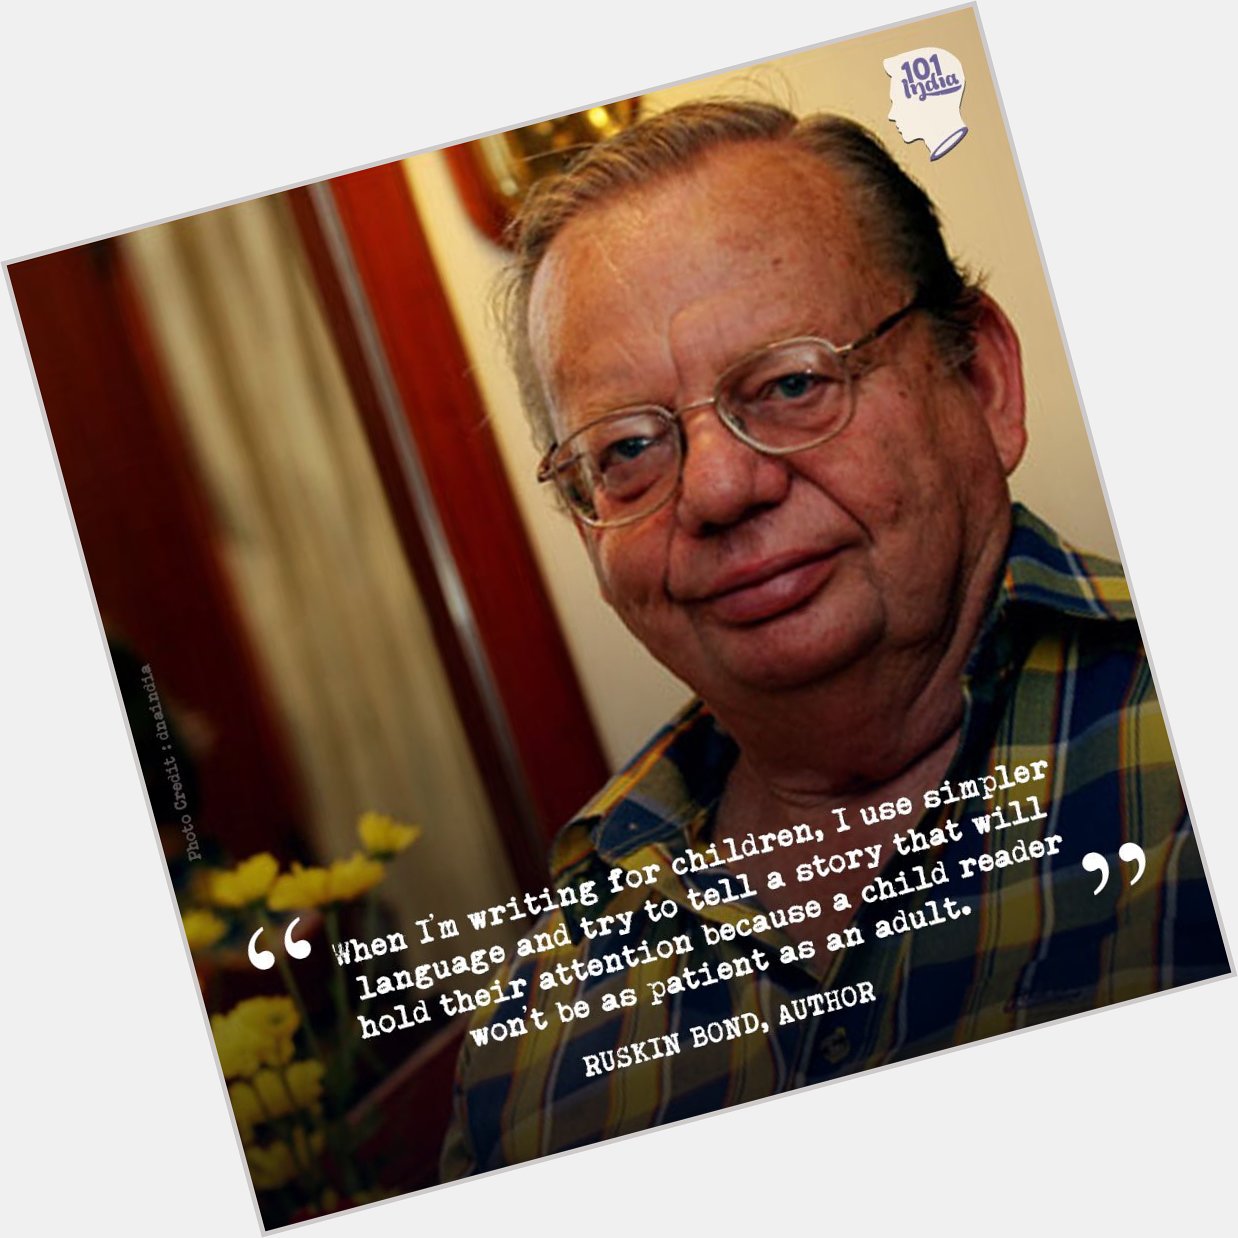 Happy Birthday to one of the best children\s authors there is - Ruskin Bond! 
 